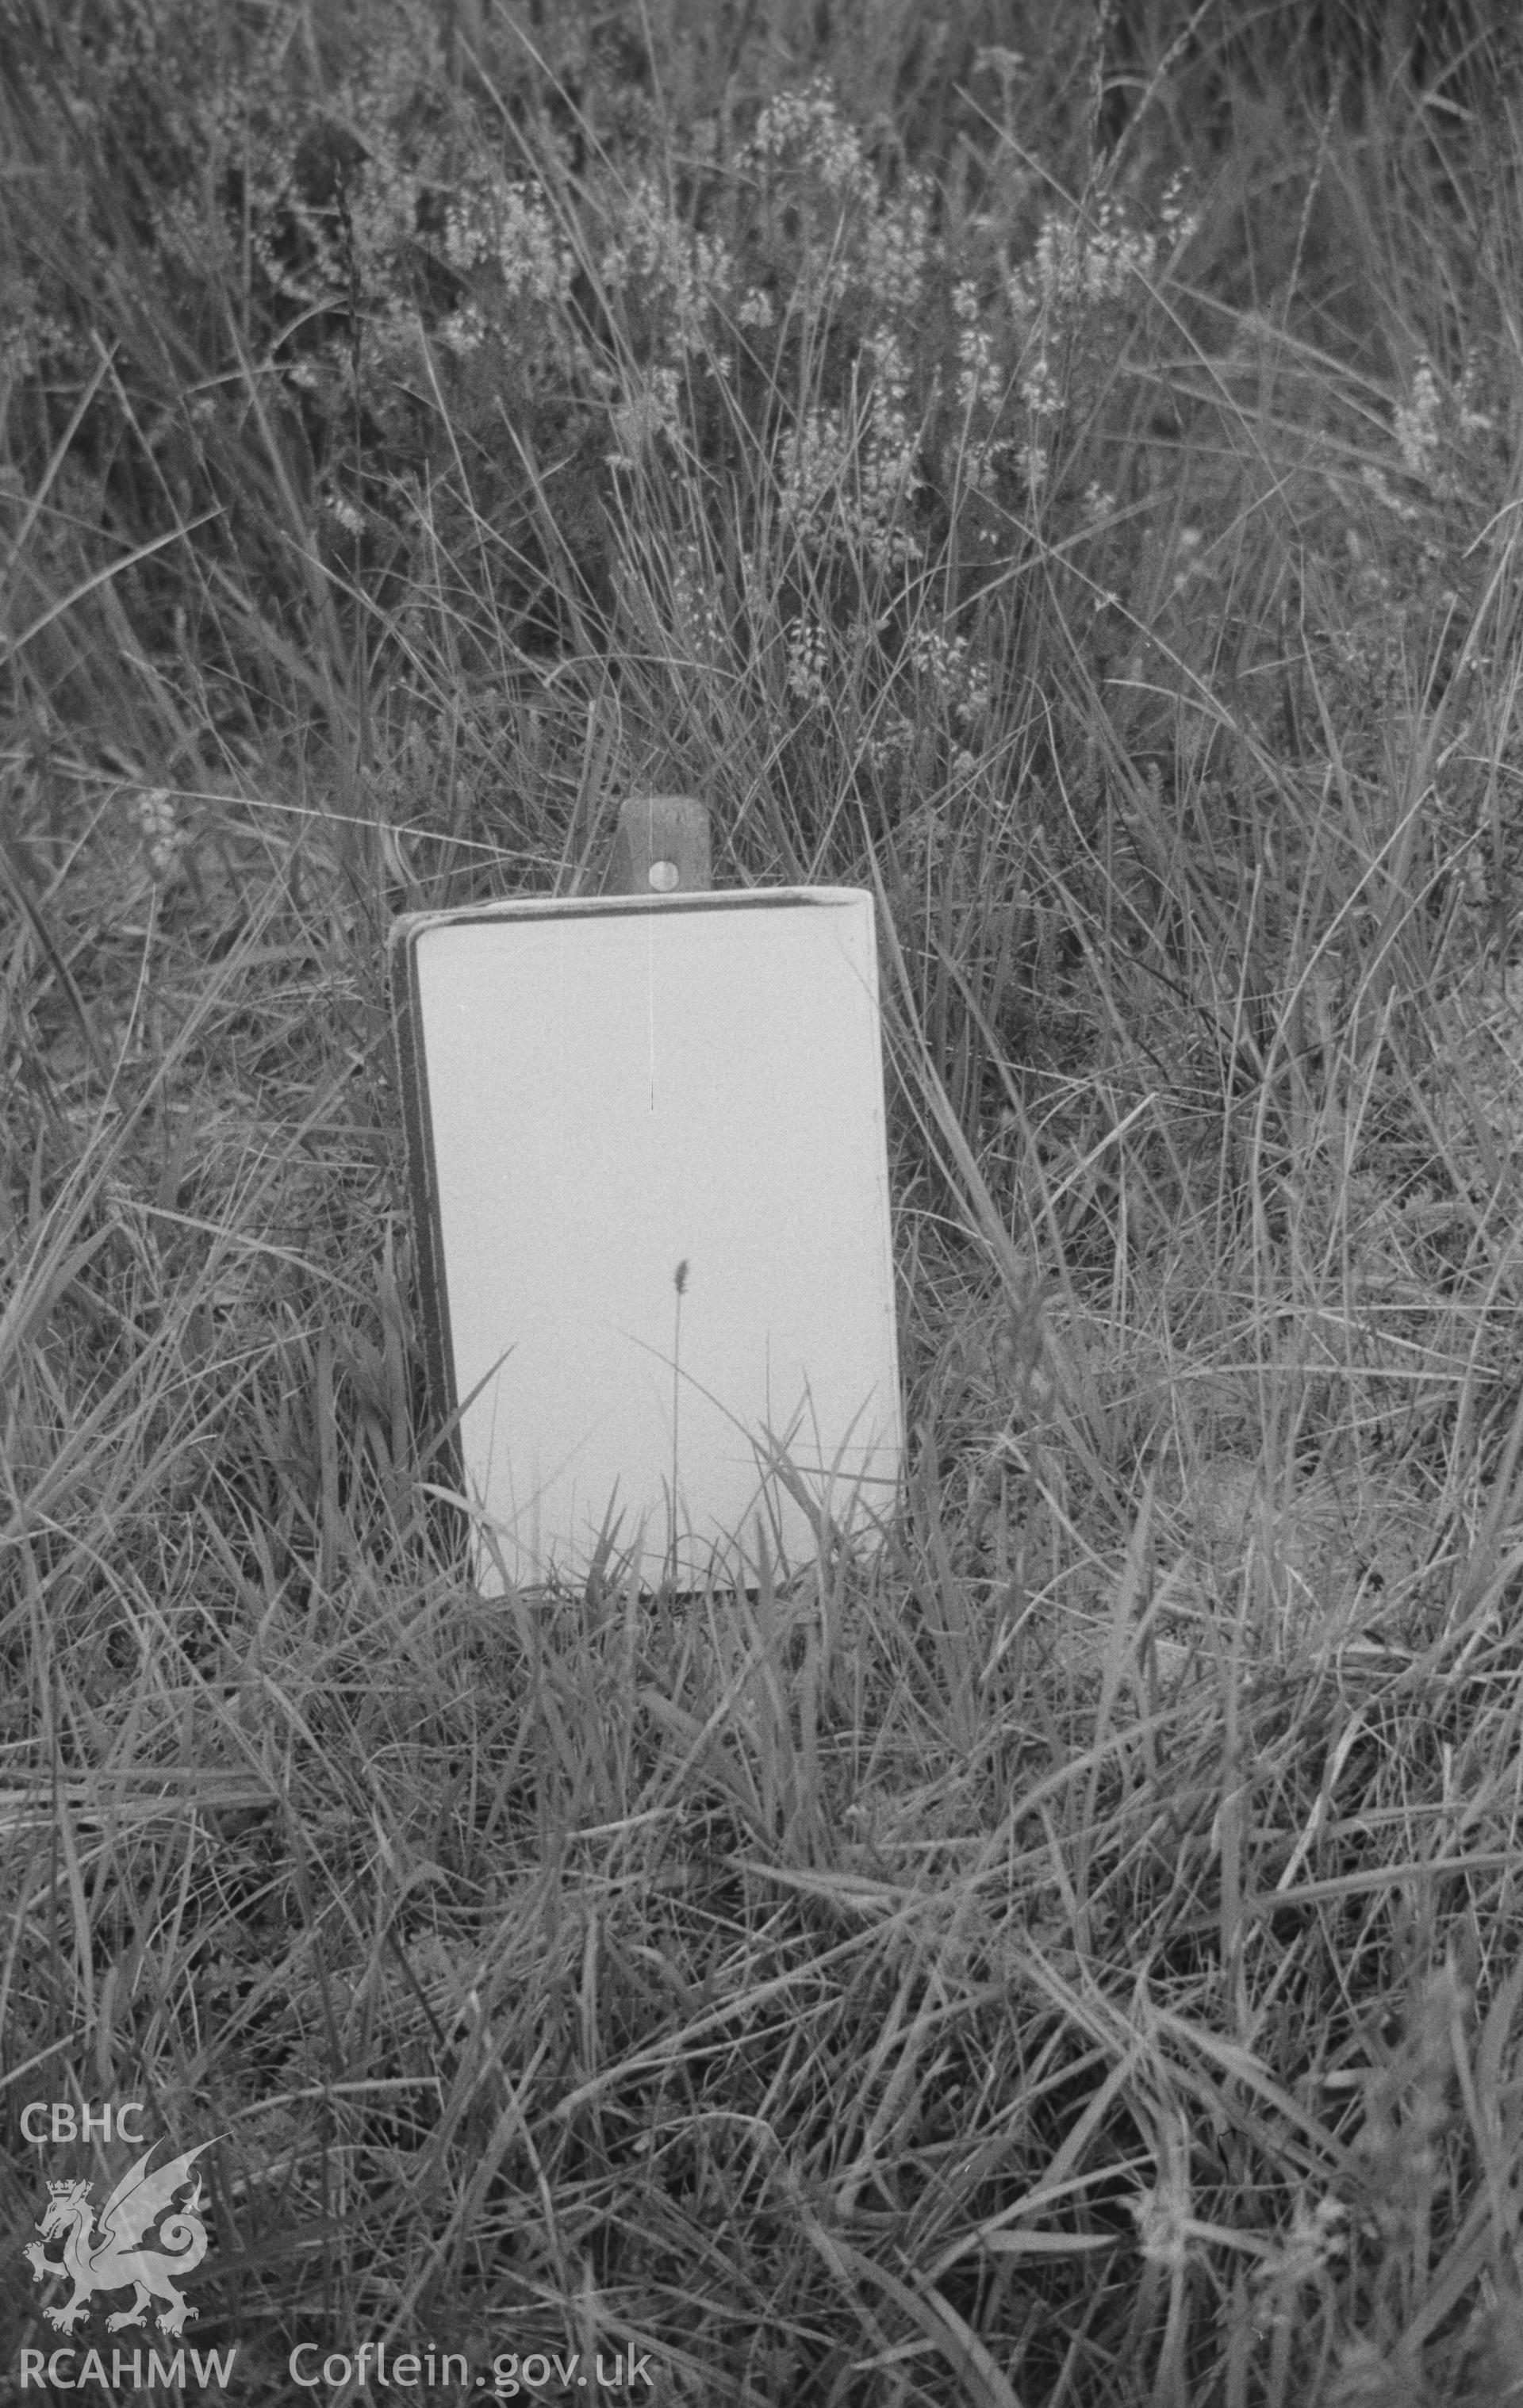 Digital copy of a black and white negative showing carex dioica (sedge), the first record for Cardiganshire, in small flush in Coed Bwlchgwallter just below new forestry road, 1150ft. Photographed in August 1963 by Arthur O. Chater, SN 769 721.